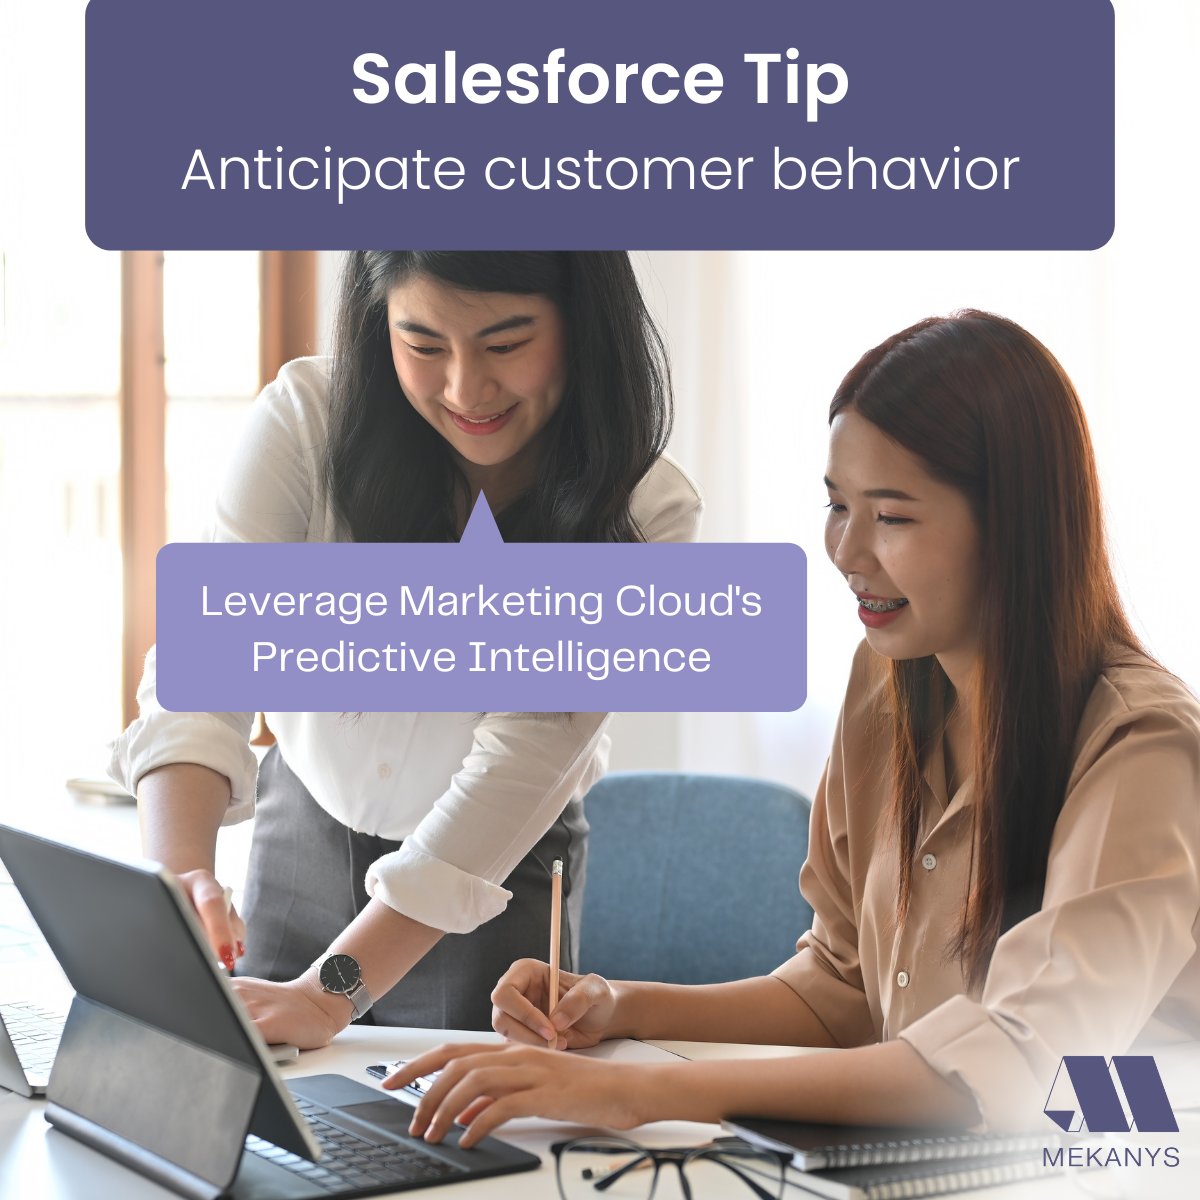 Leverage Marketing Cloud's Predictive Intelligence to analyze customer data and make informed marketing decisions. Anticipate customer behavior and personalize your campaigns for maximum impact. #MarketingCloudTips #PredictiveAnalytics